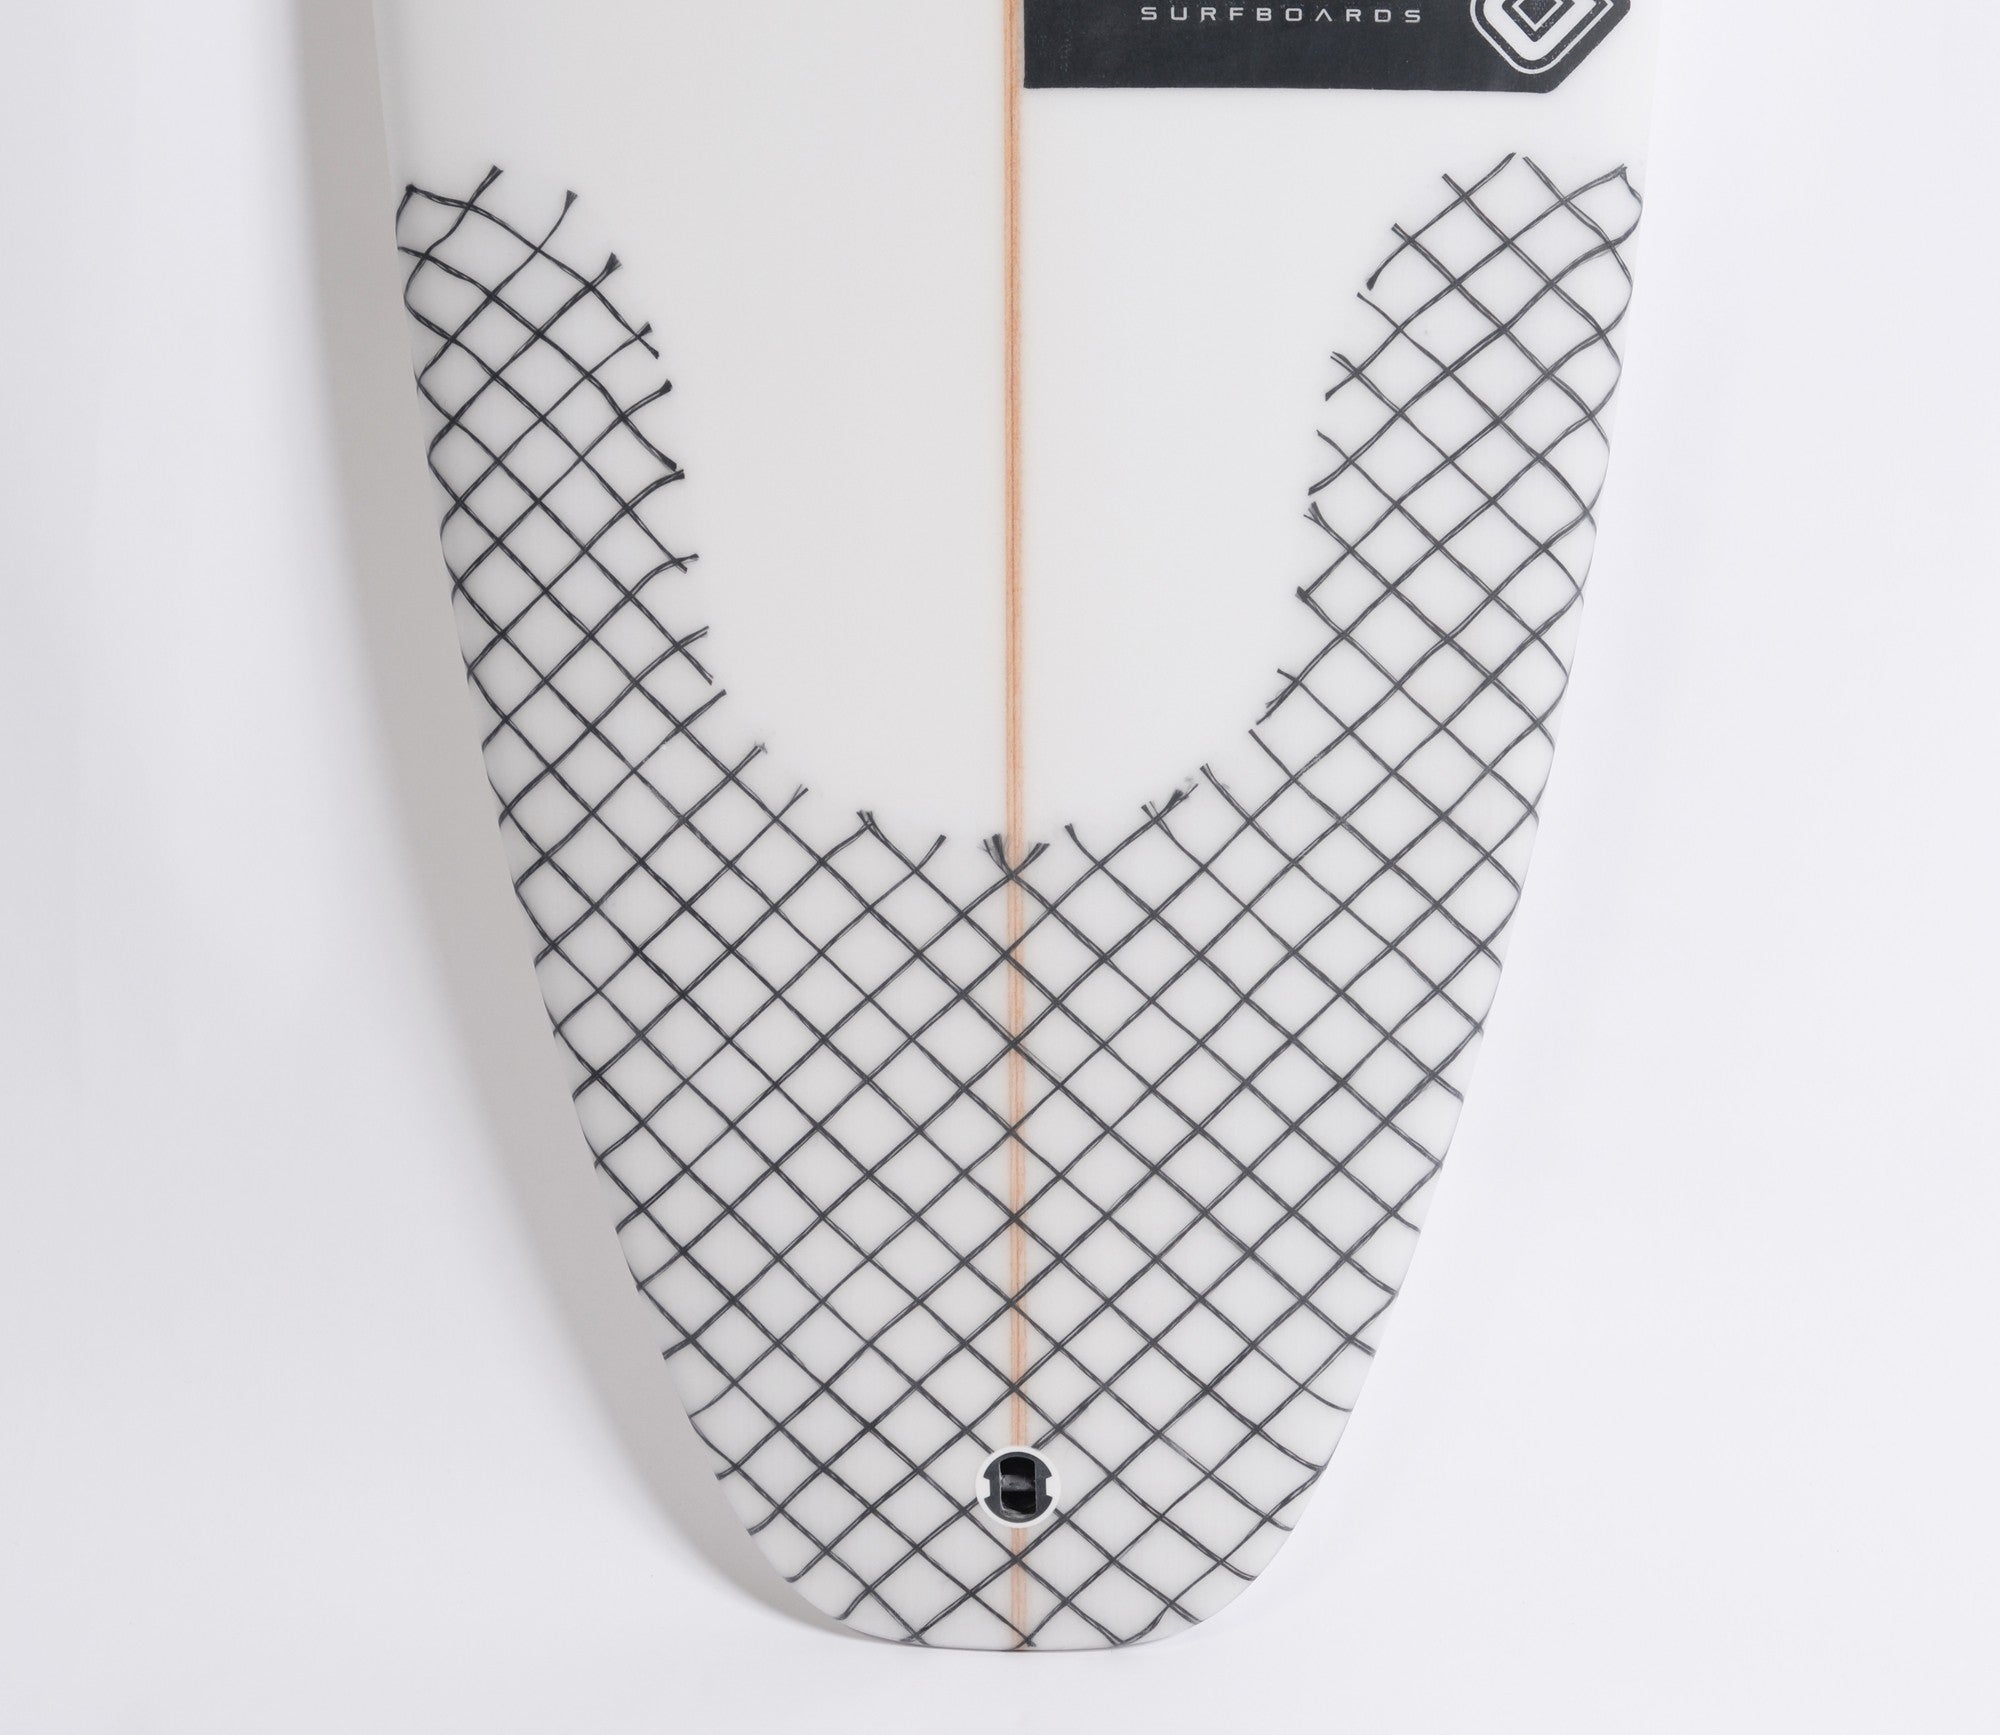 CLAYTON Surfboards - The Rox Black Label Edition (PU)